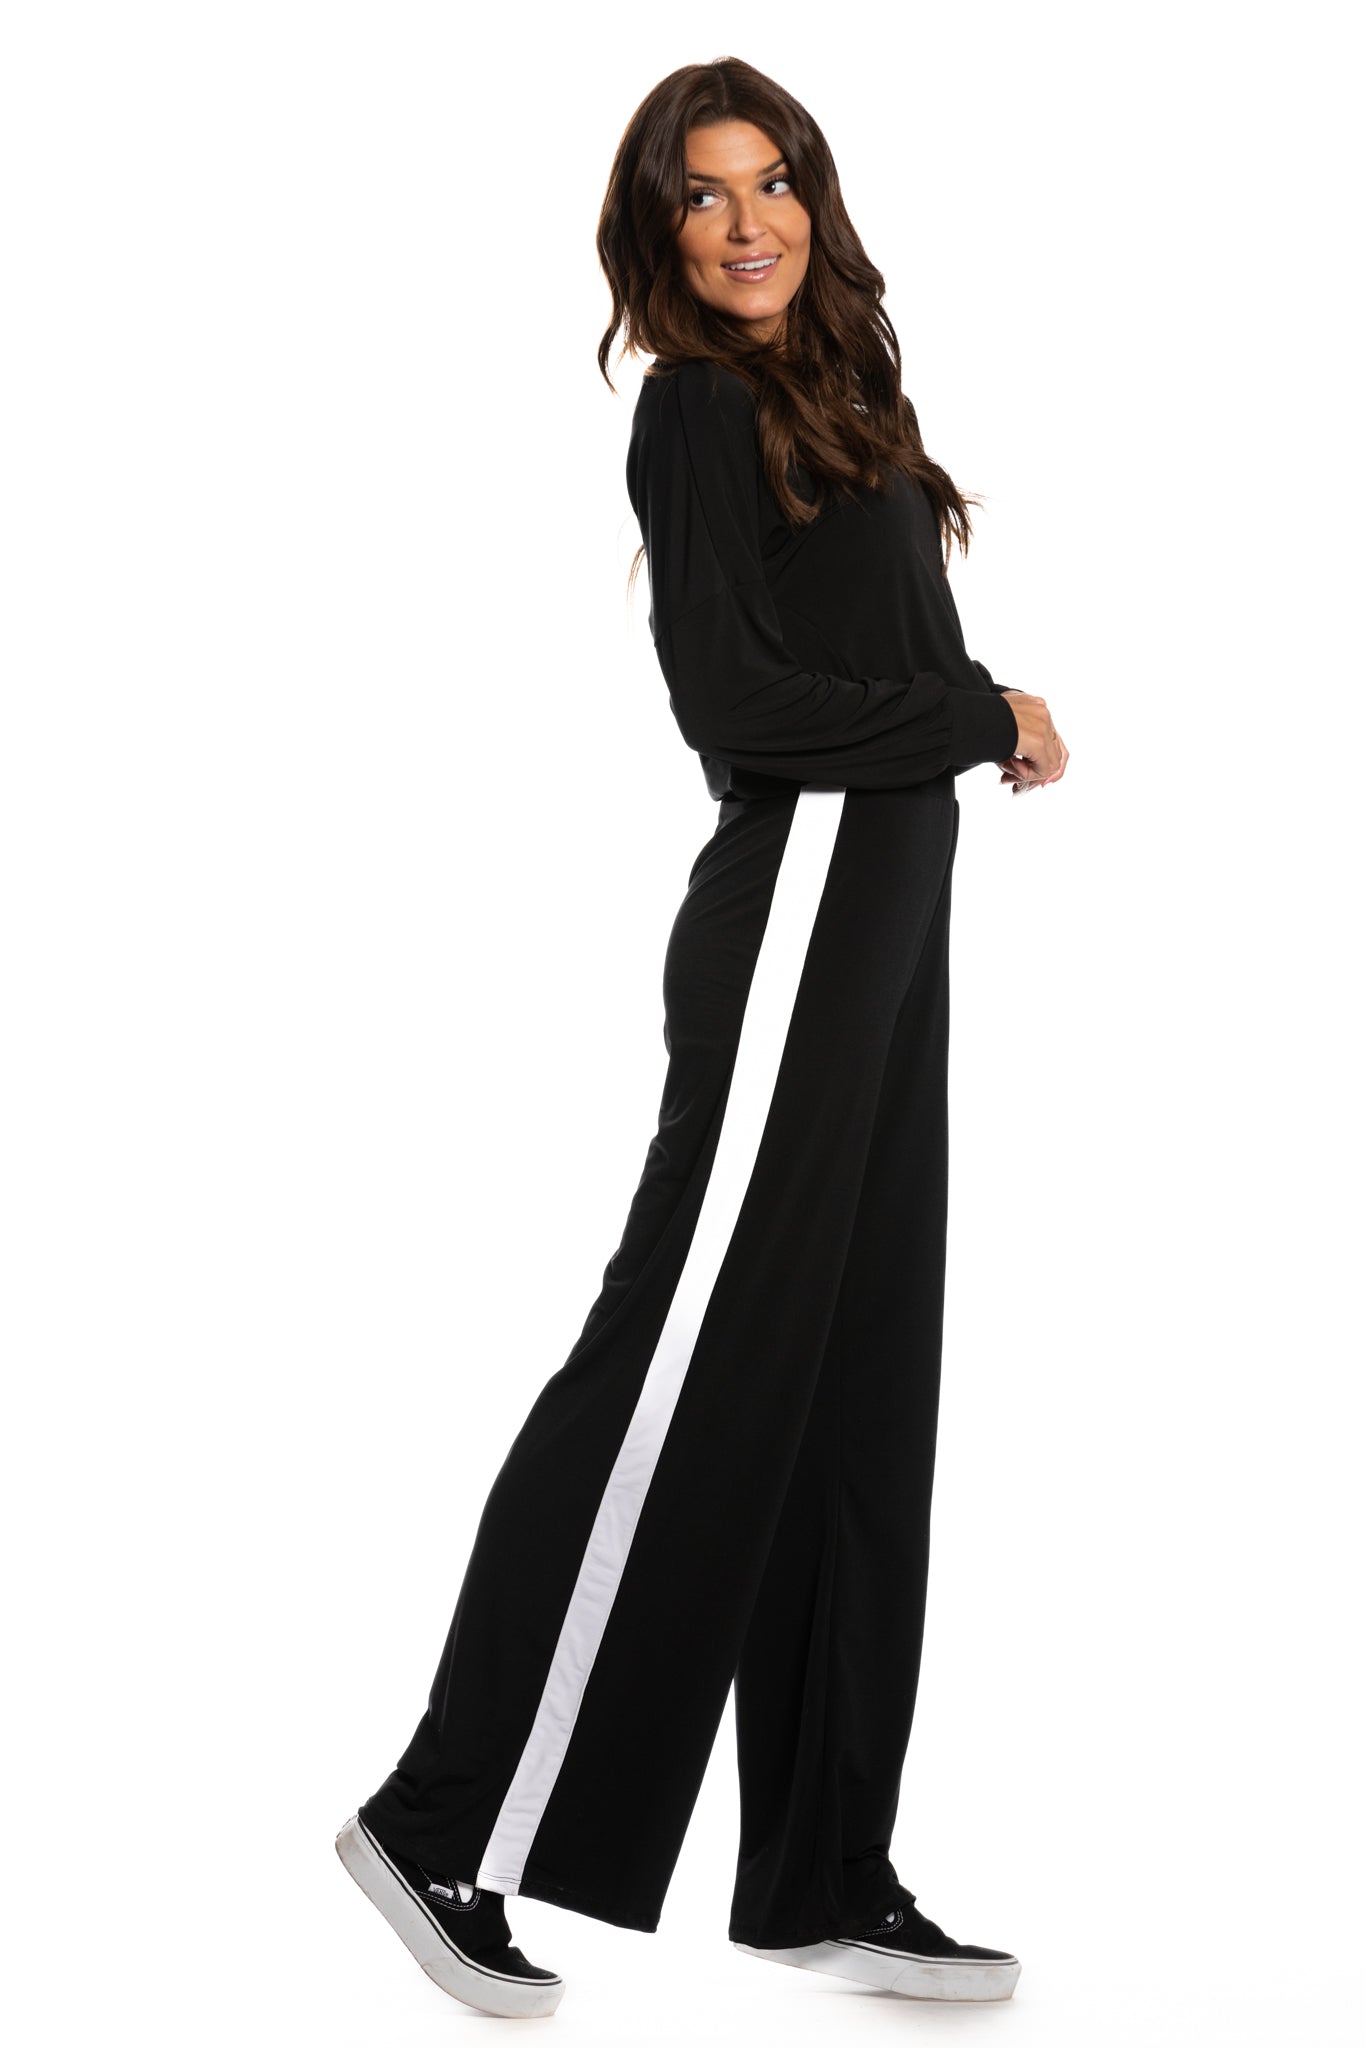 Striped Black And White Striped Pants Women Suit For Spring, Summer, And  Formal Occasions Perfect For Celebrity, Mother Of The Bride, Evening  Parties, Weddings, Or More From Greatvip, $72.45 | DHgate.Com